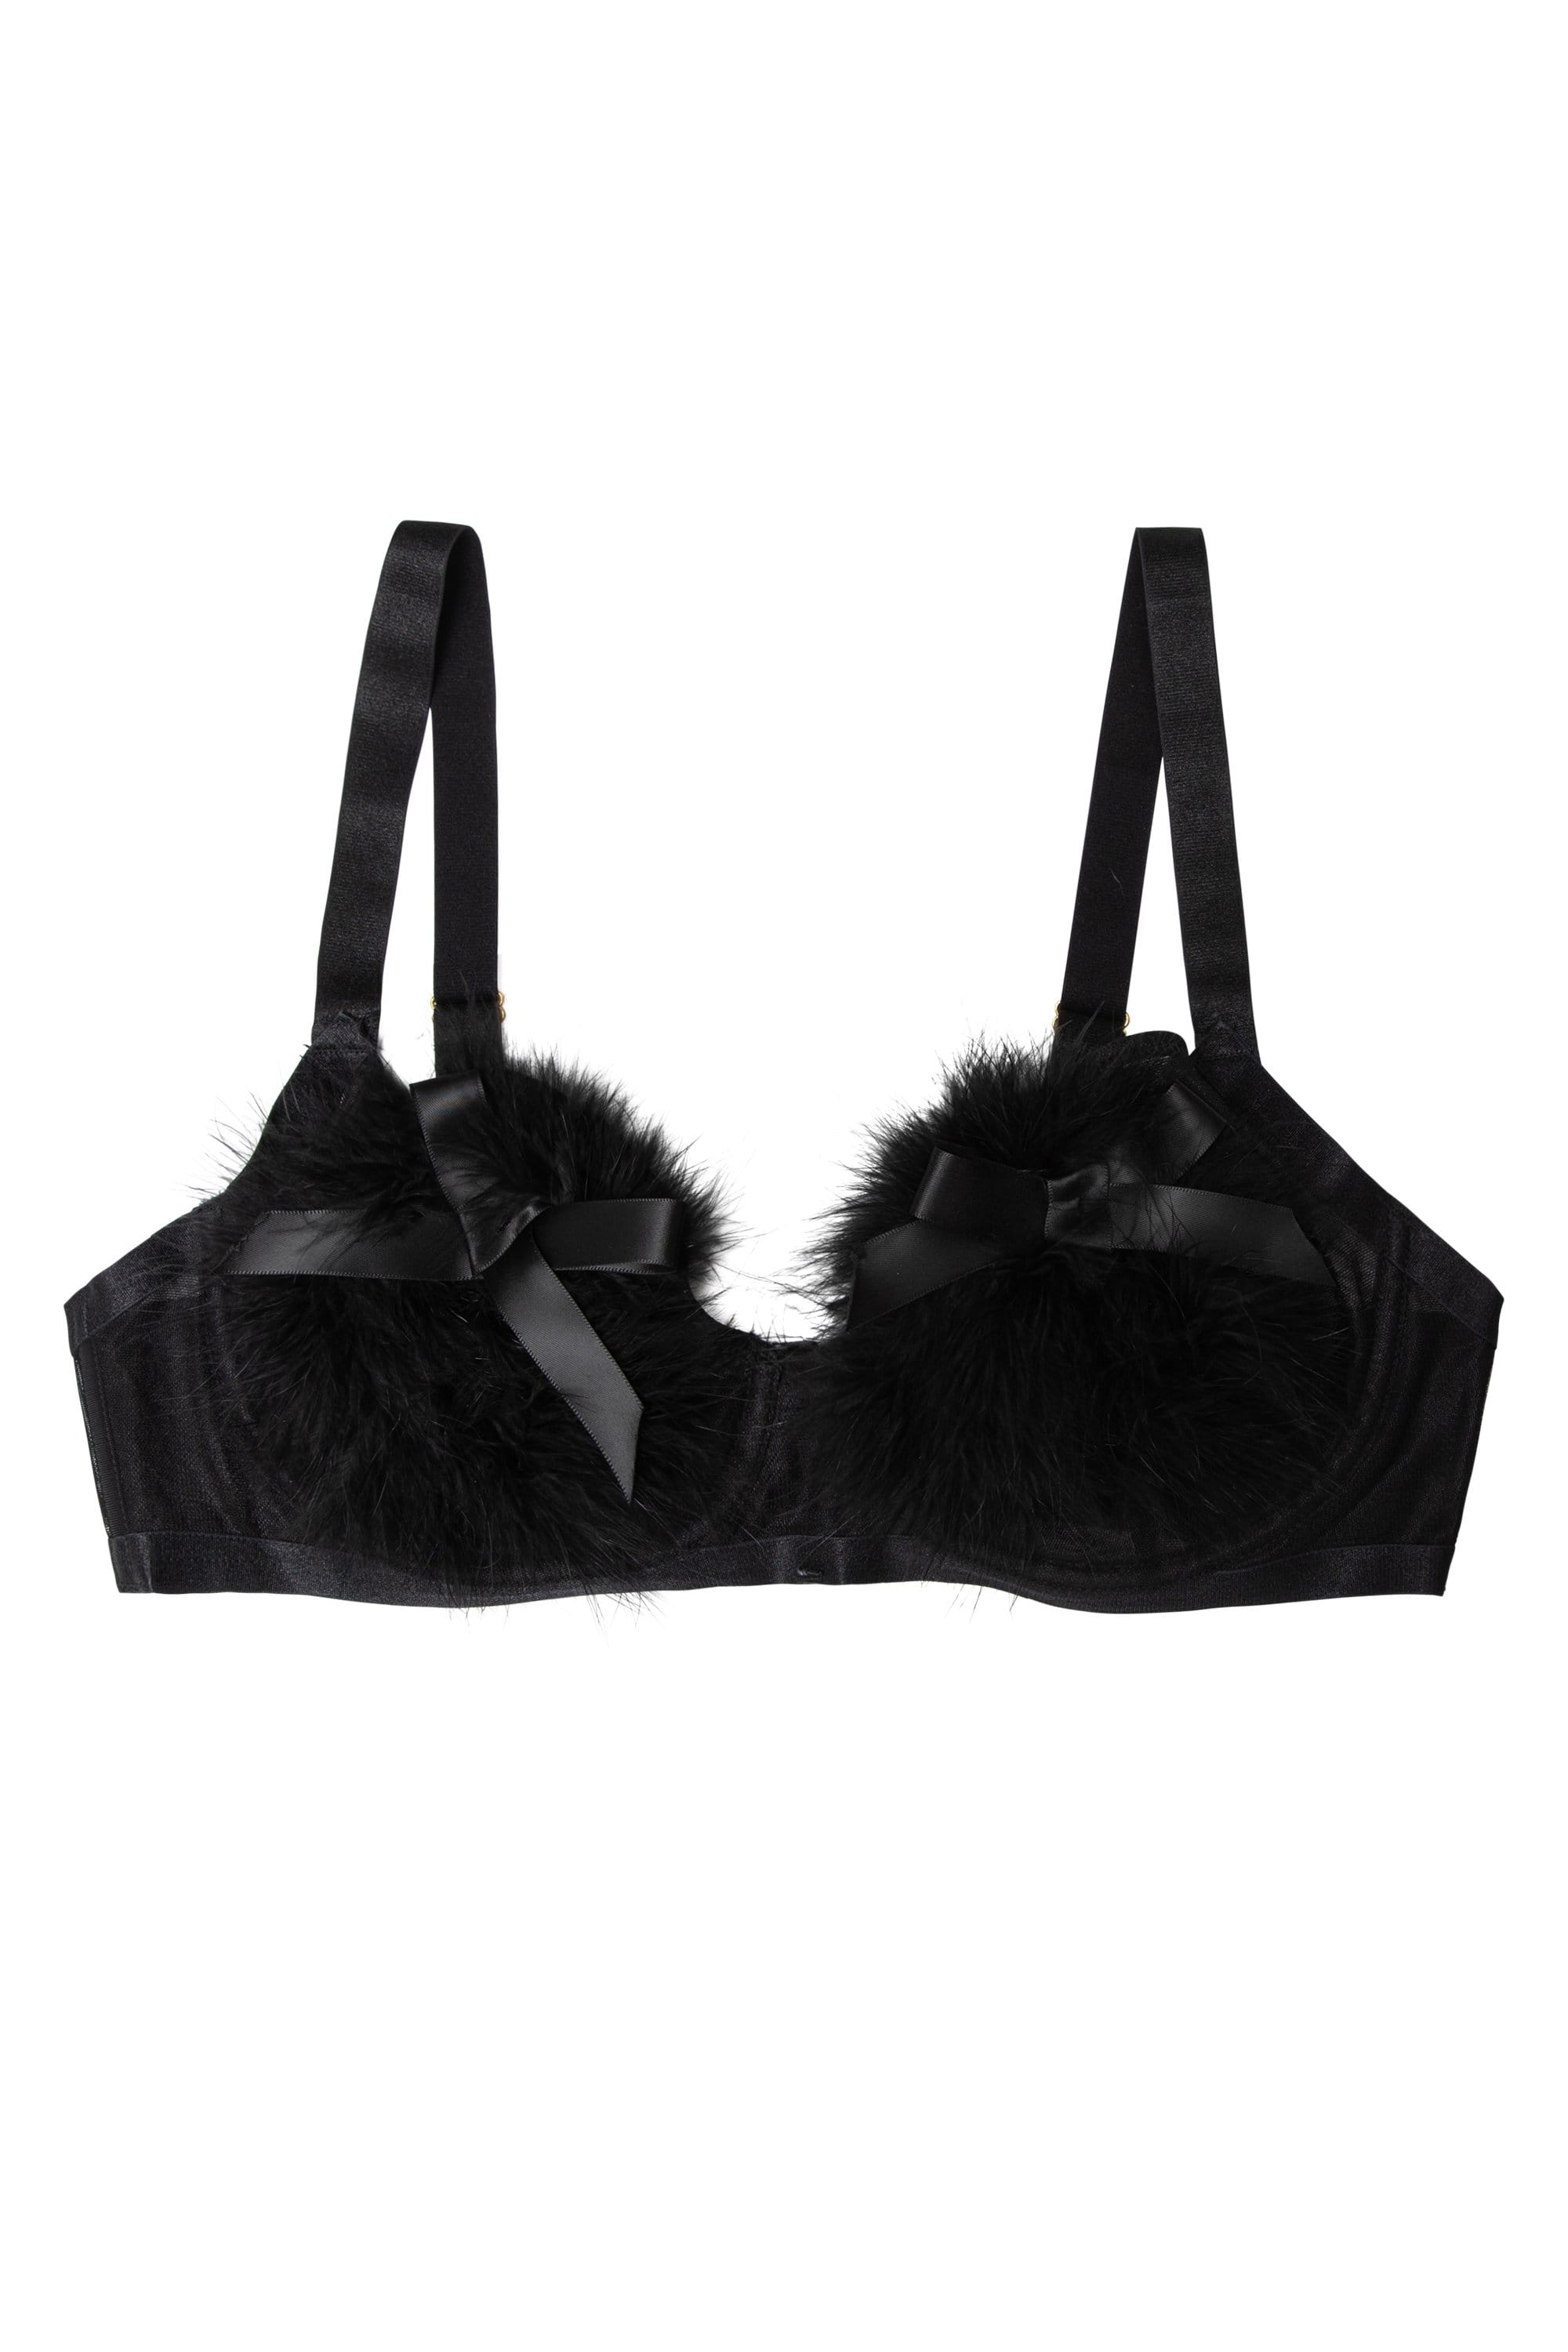 Buy online Bow Patch Regular Bra from lingerie for Women by Featherline for  ₹290 at 42% off